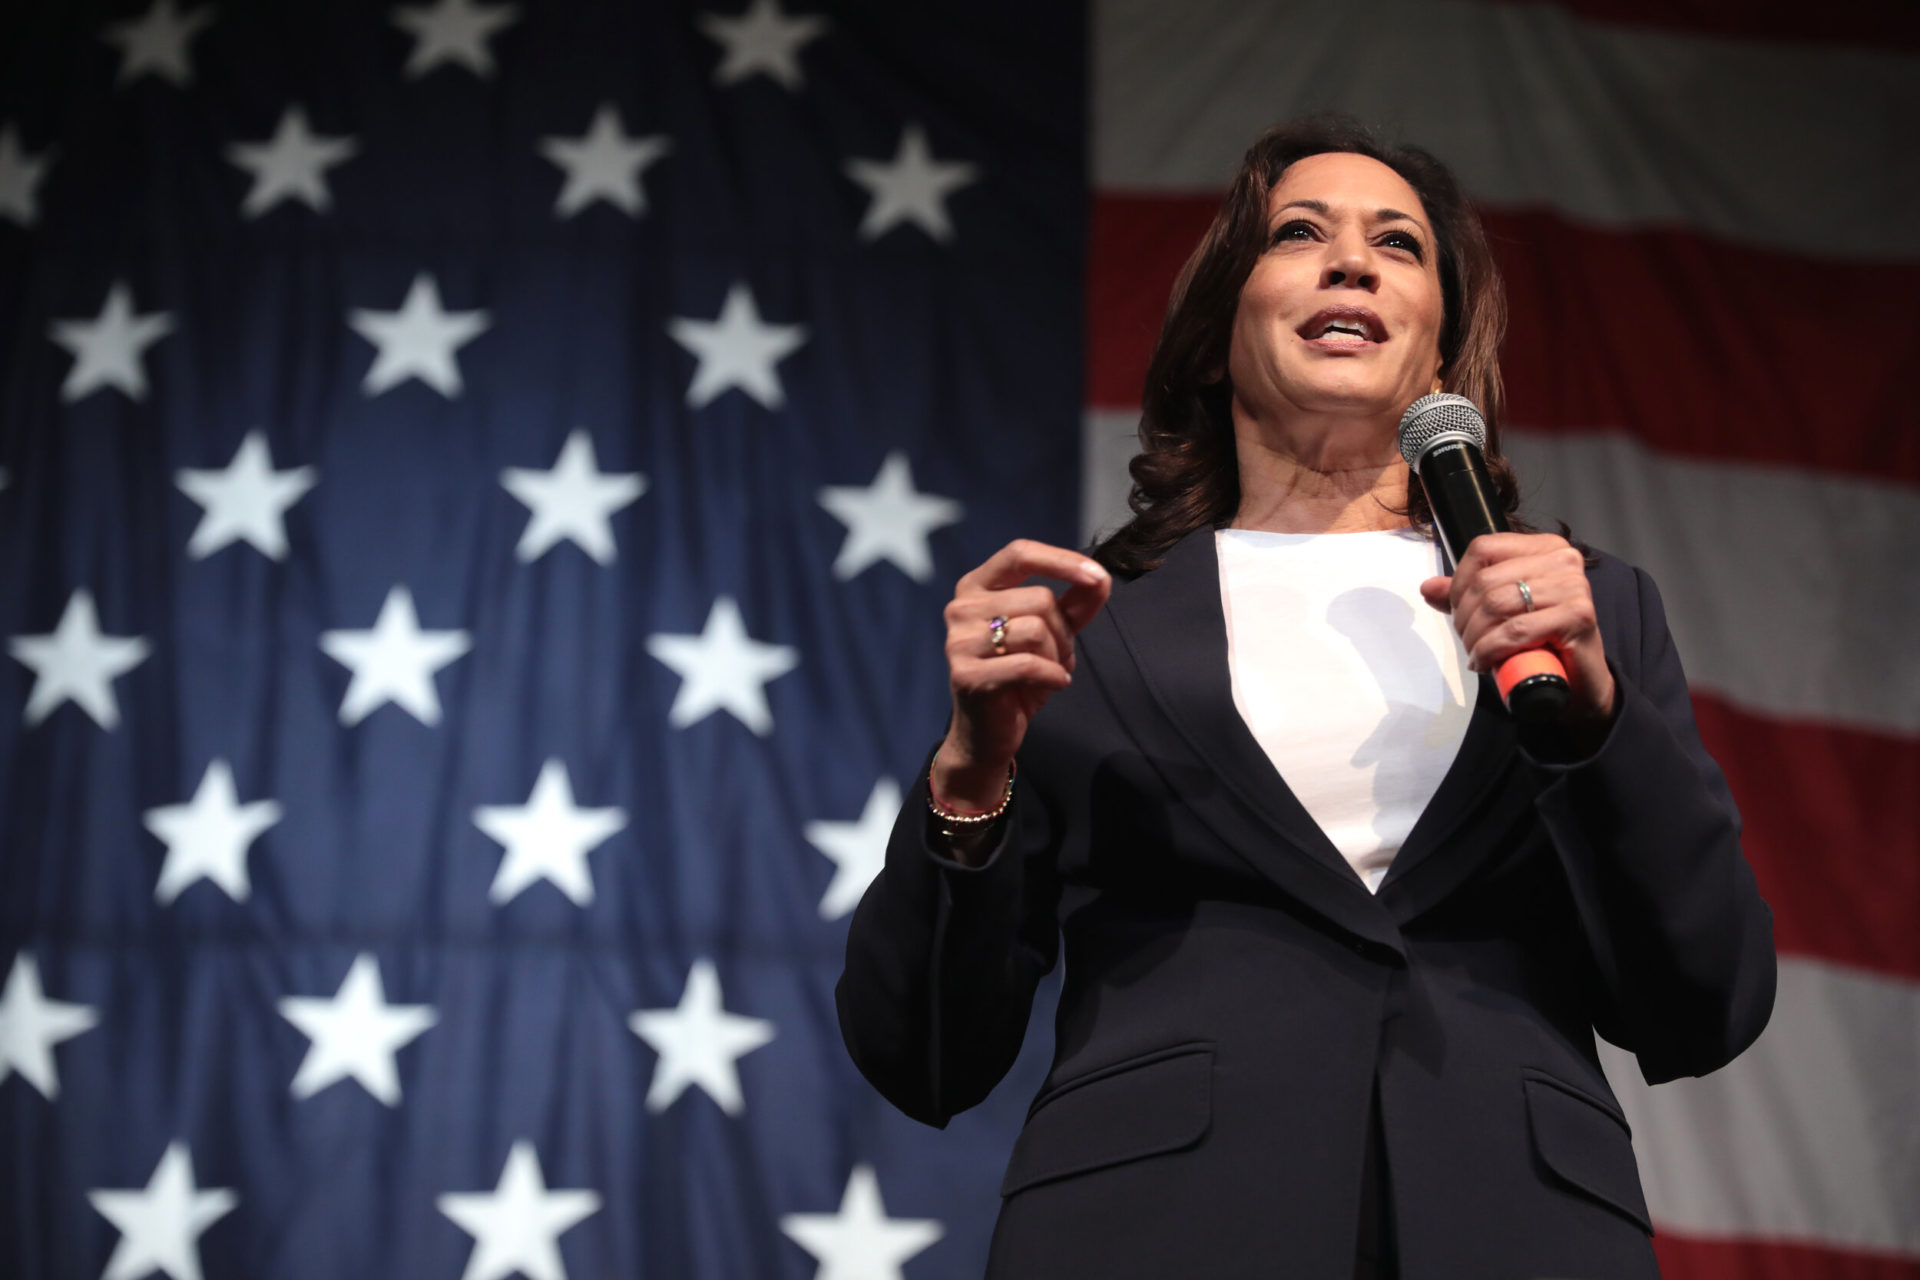 U.S. Senator Kamala Harris speaking with attendees at the 2019 Iowa Democratic Wing Ding at Surf Ballroom in Clear Lake, Iowa. (Photo by Gage Skidmore)